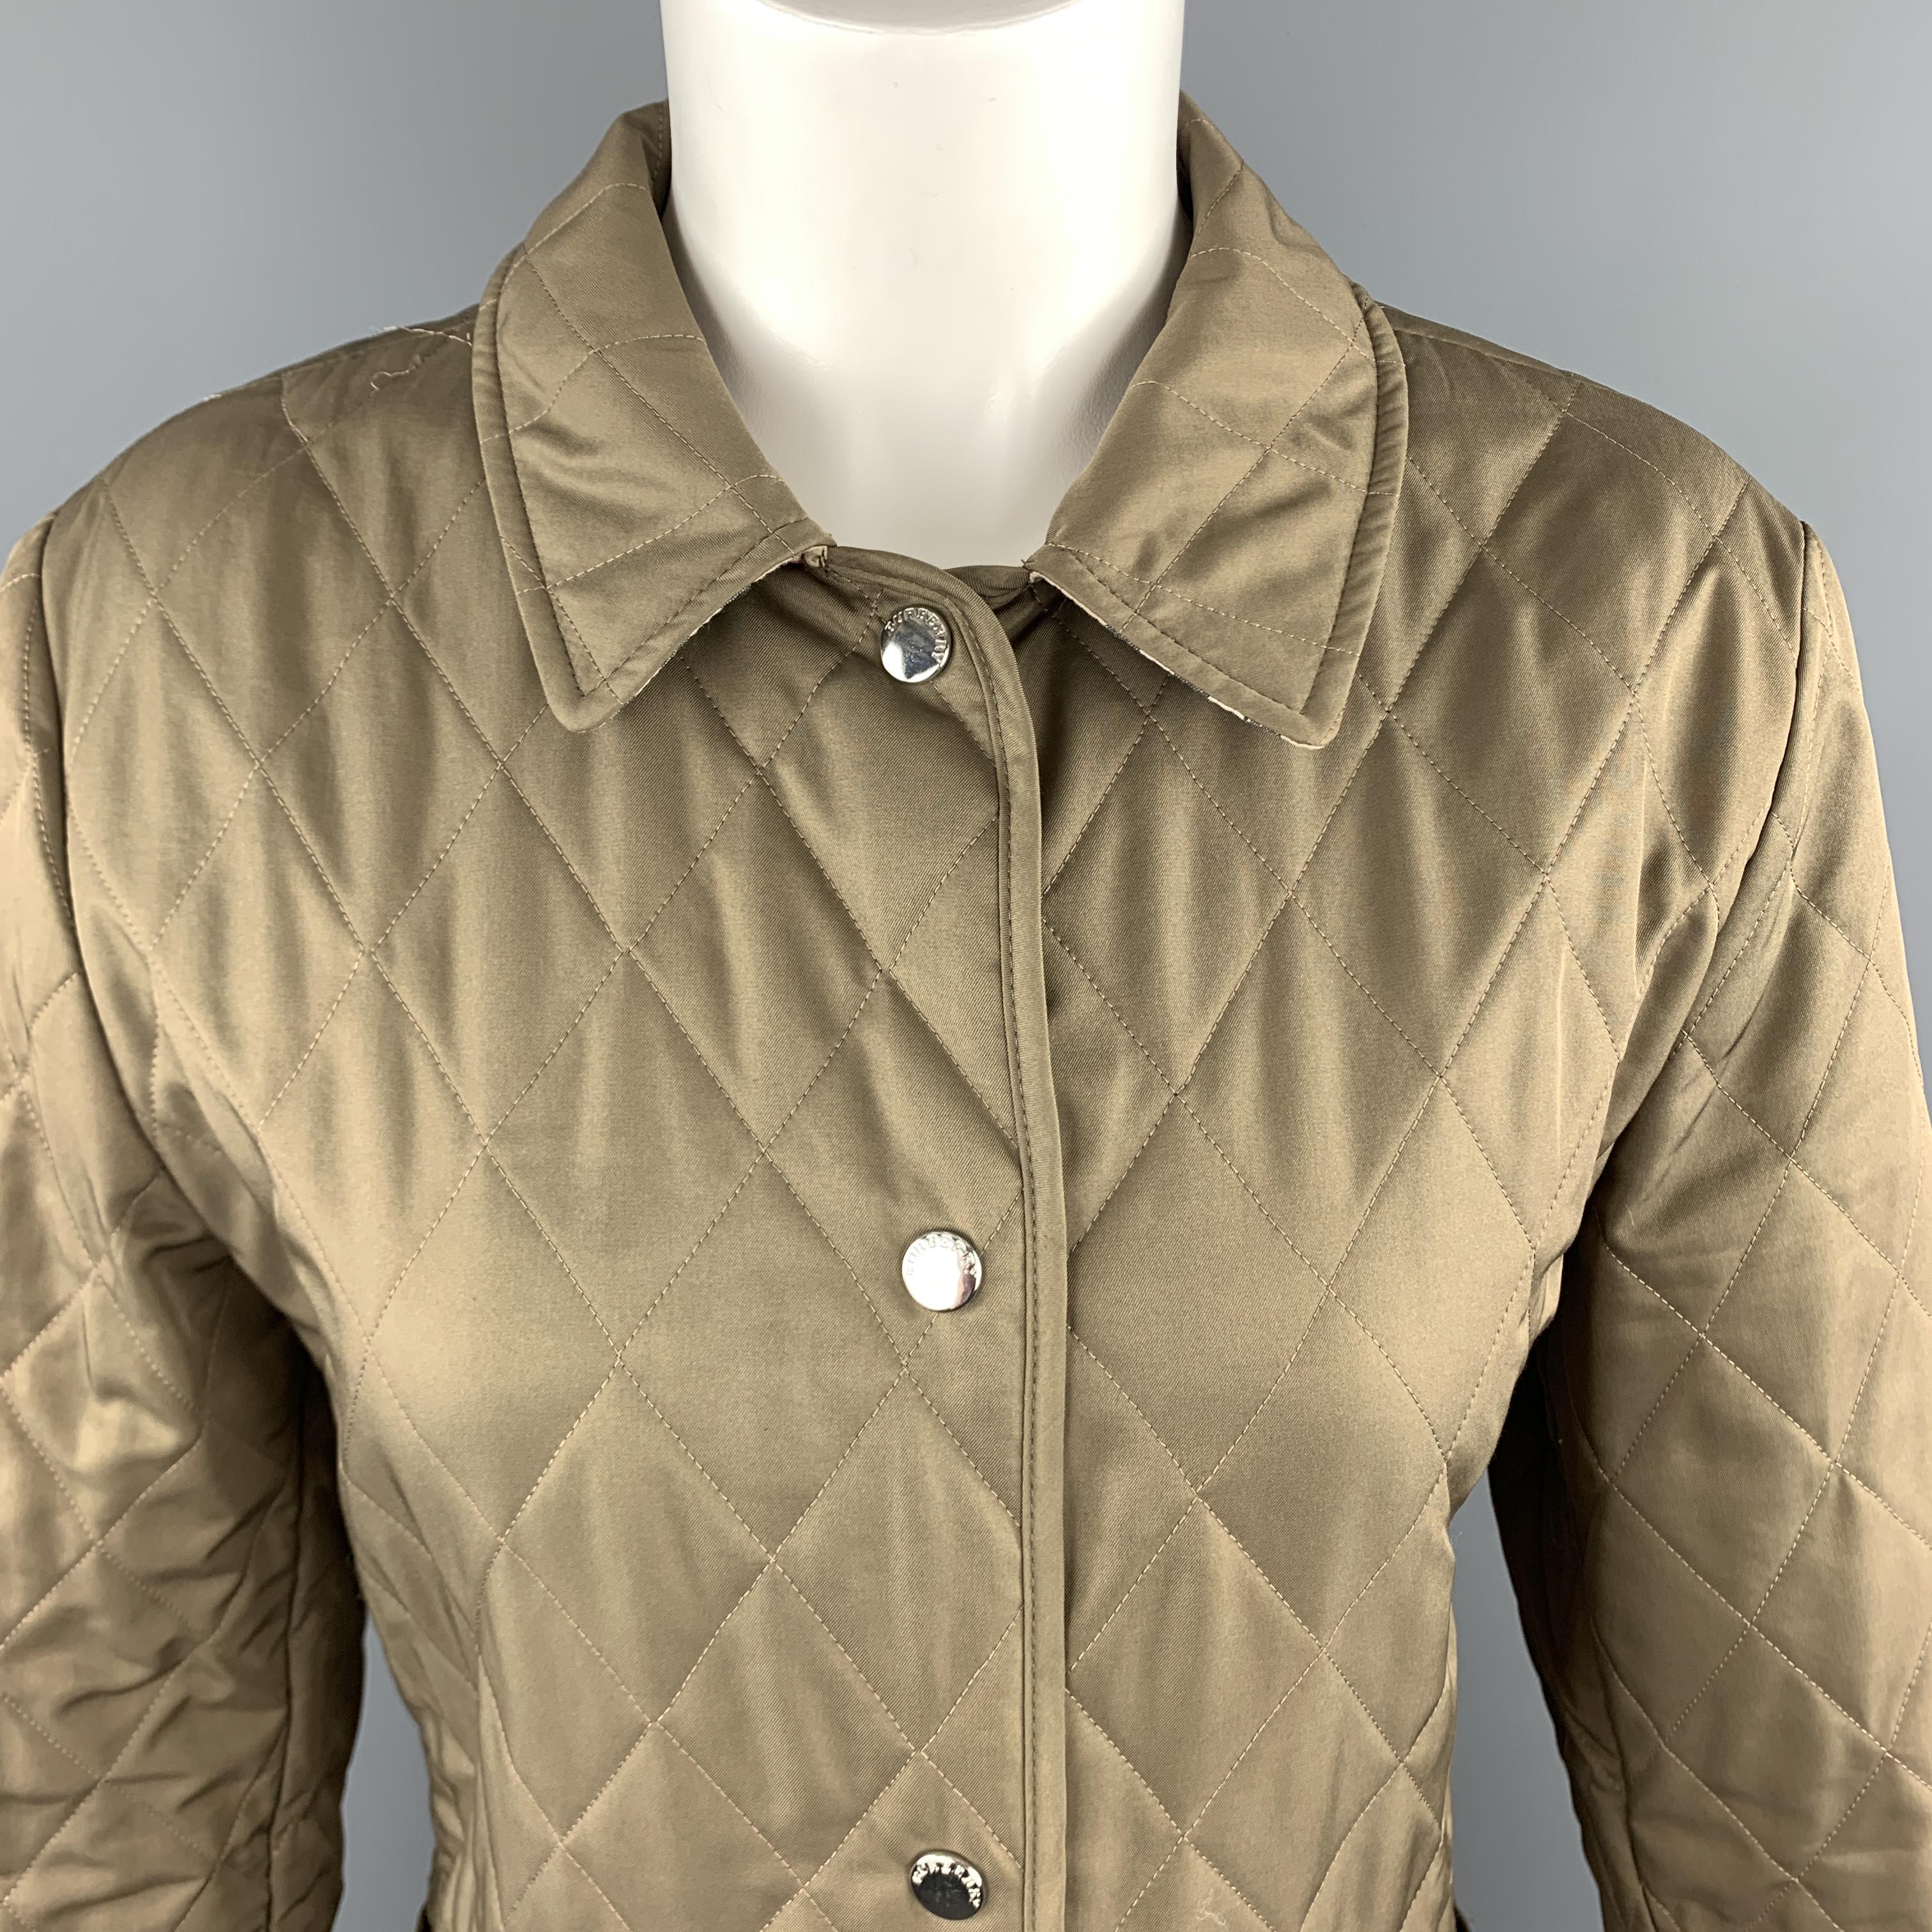 BURBERRY jacket comes in olive green quilted twill with a silver tone snap up closure, patch pockets, pointed collar, and plaid liner. Minor wear.  Made in England.

Very Good Pre-Owned Condition.
Marked: (no size)

Measurements:

Shoulder: 16